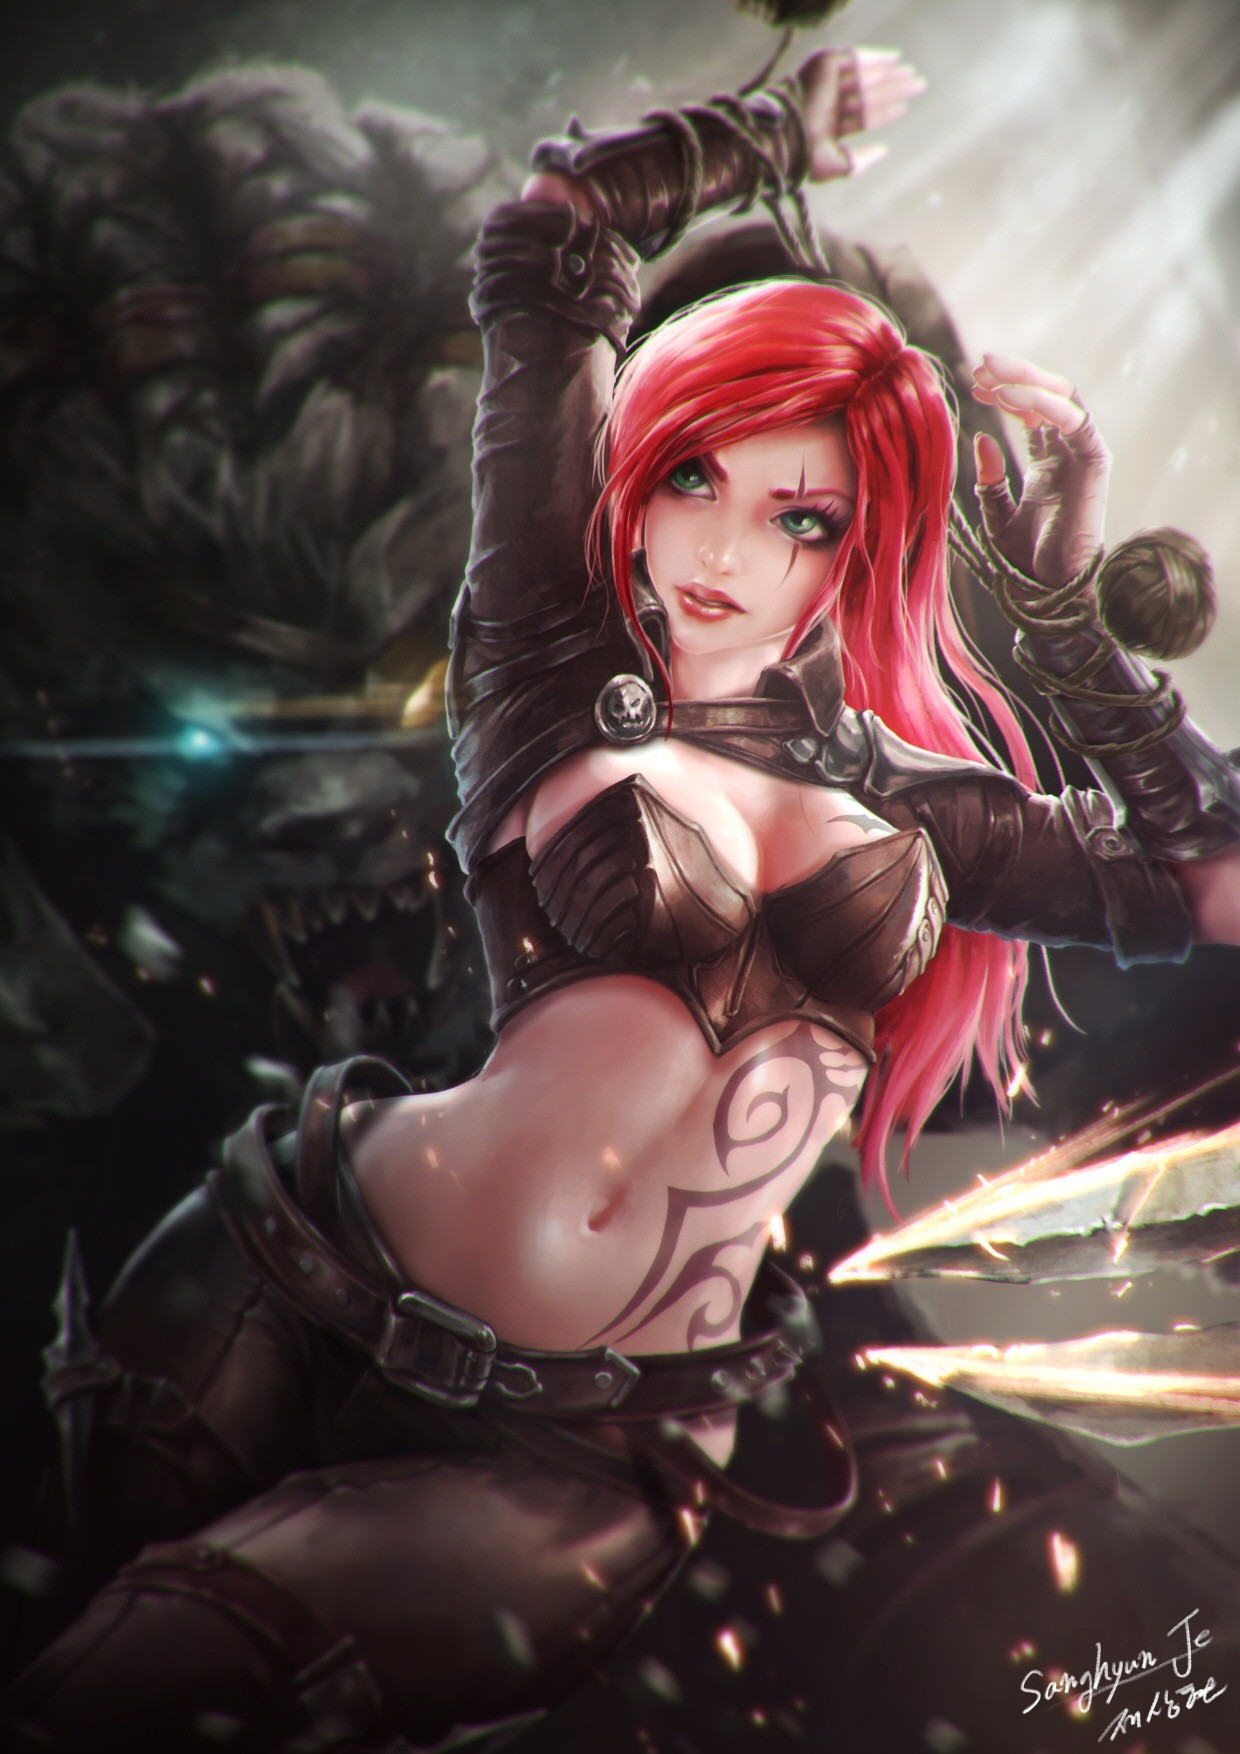 Anime 1240x1754 realistic Sanghyun Je League of Legends Katarina (League of Legends) PC gaming women fantasy girl video game girls video game characters boobs bra belly green eyes